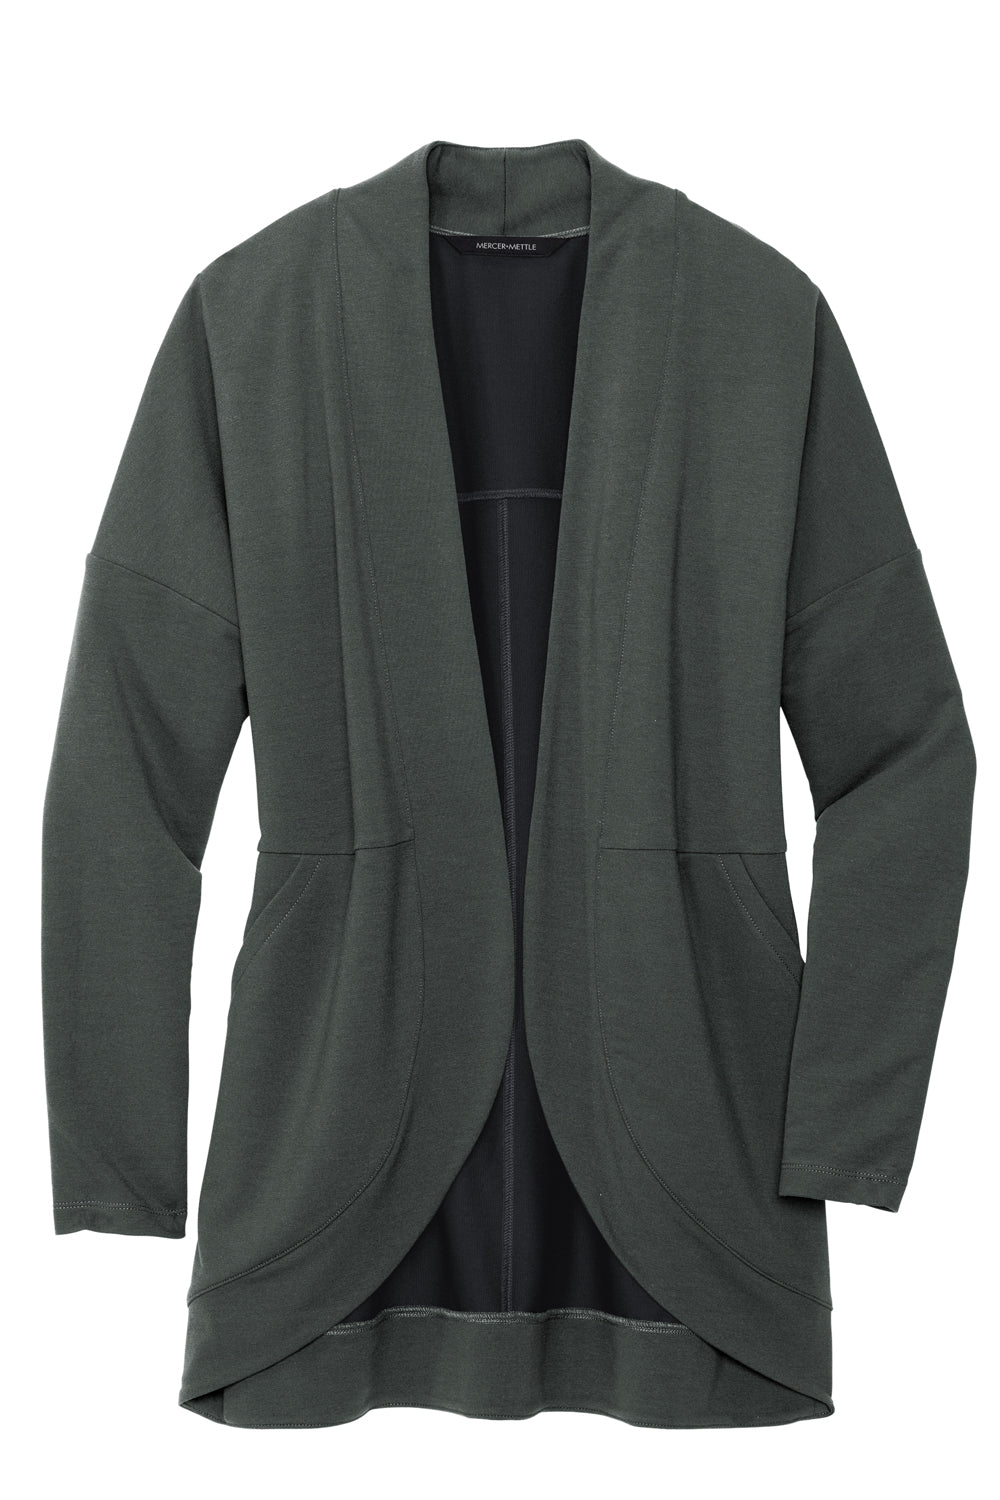 Mercer+Mettle MM3015 Stretch Open Front Long Sleeve Cardigan Sweater Anchor Grey Flat Front